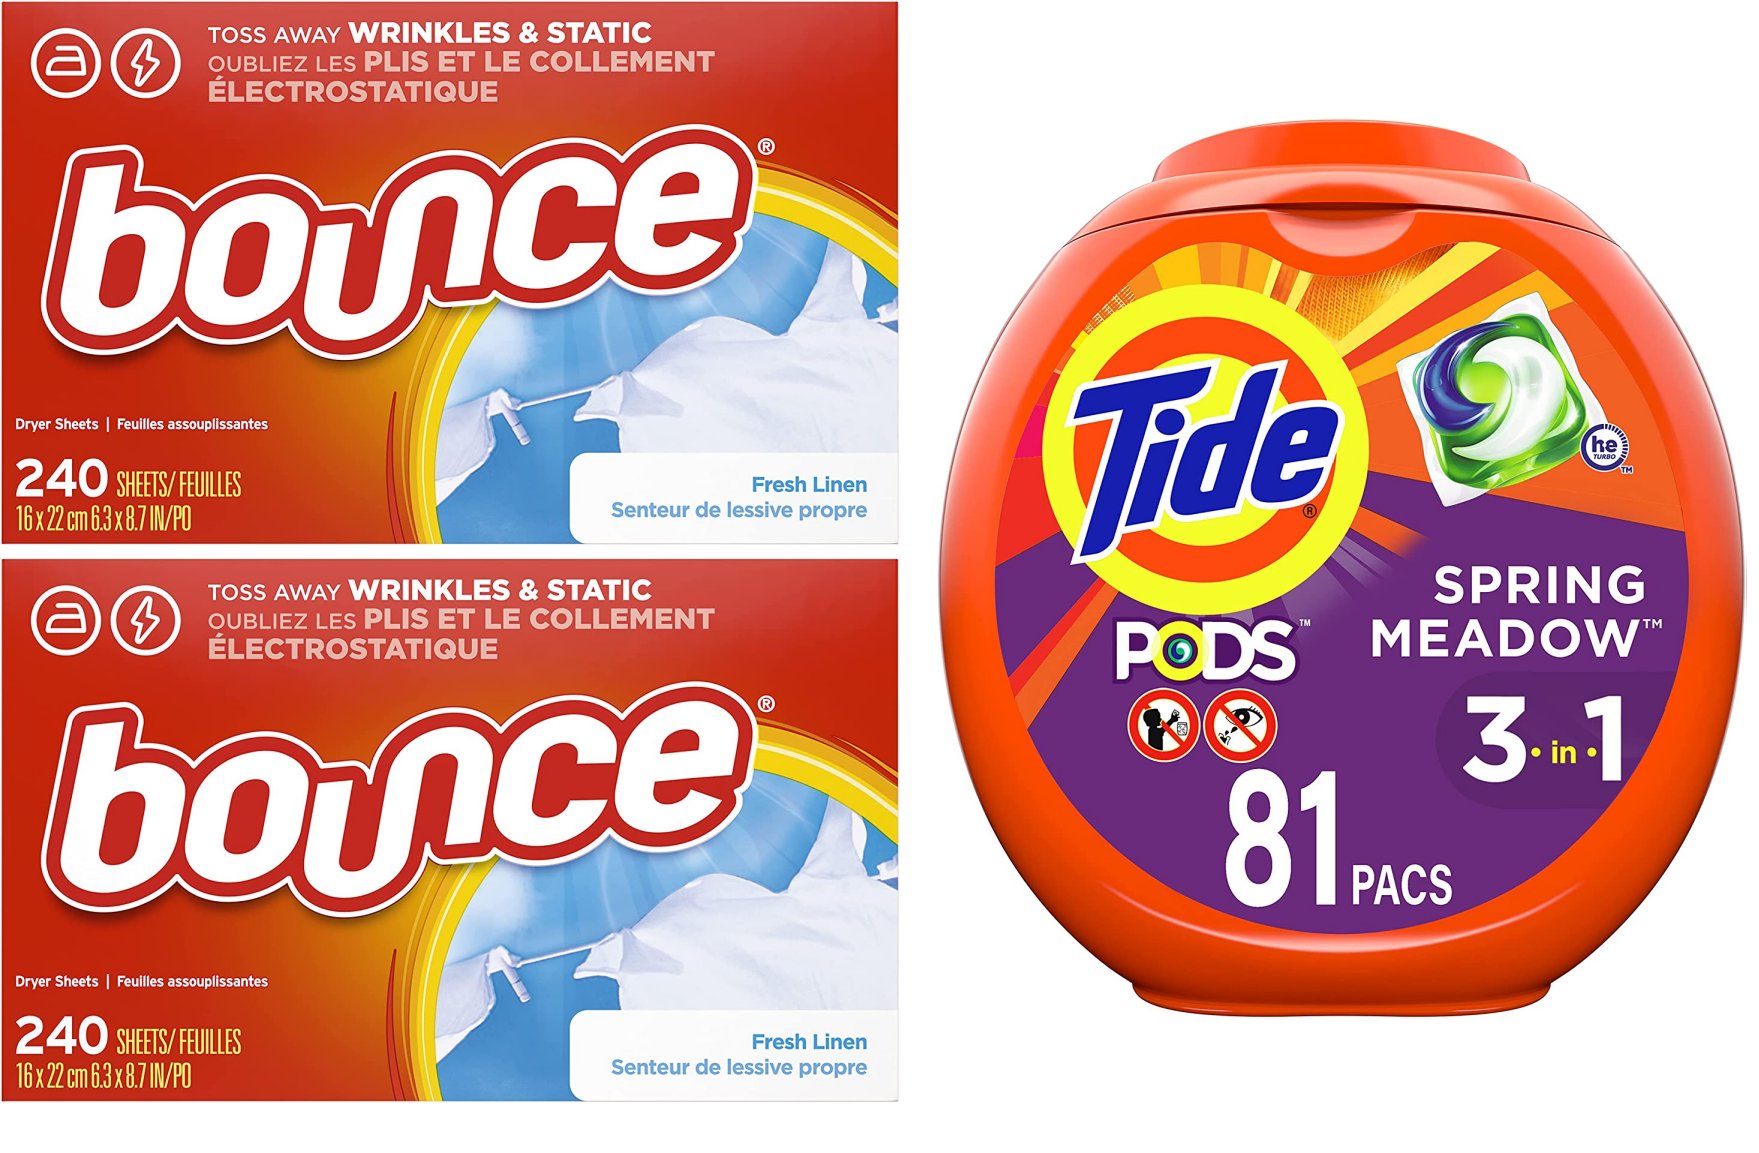 480-Count Bounce Dryer Sheets + 81-Count Tide Pods (Original) $21.20 + Free Shipping